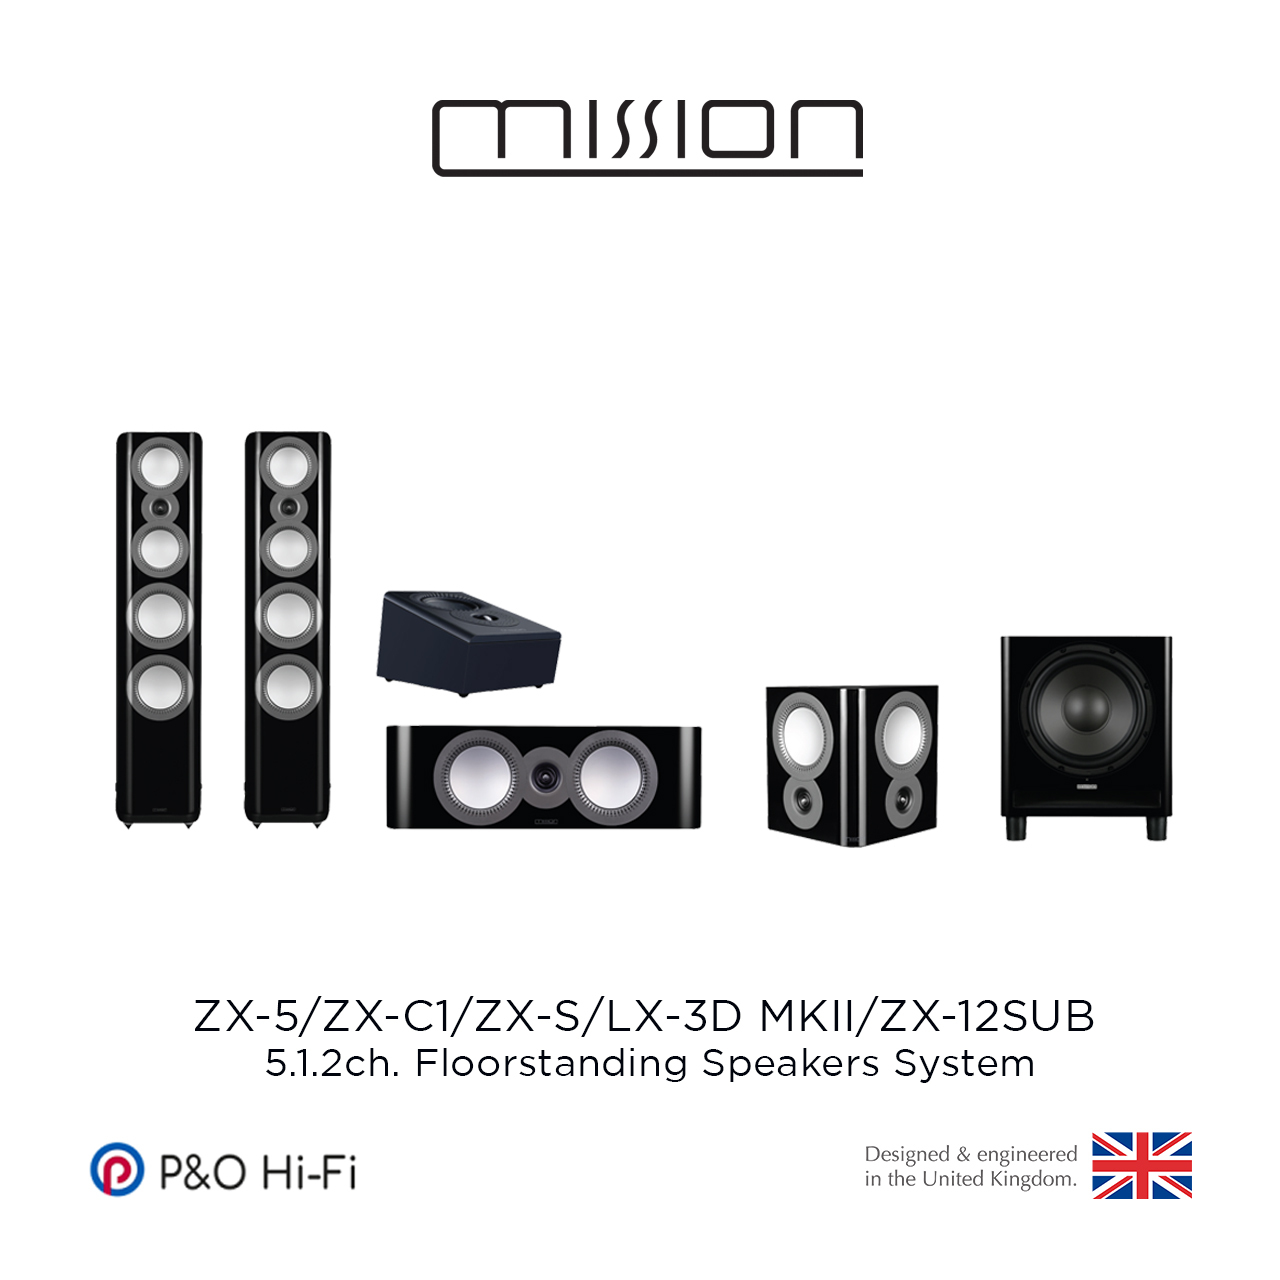 5.1.2 ch. Floorstanding Speakers System(Mission ZX-5/ZX